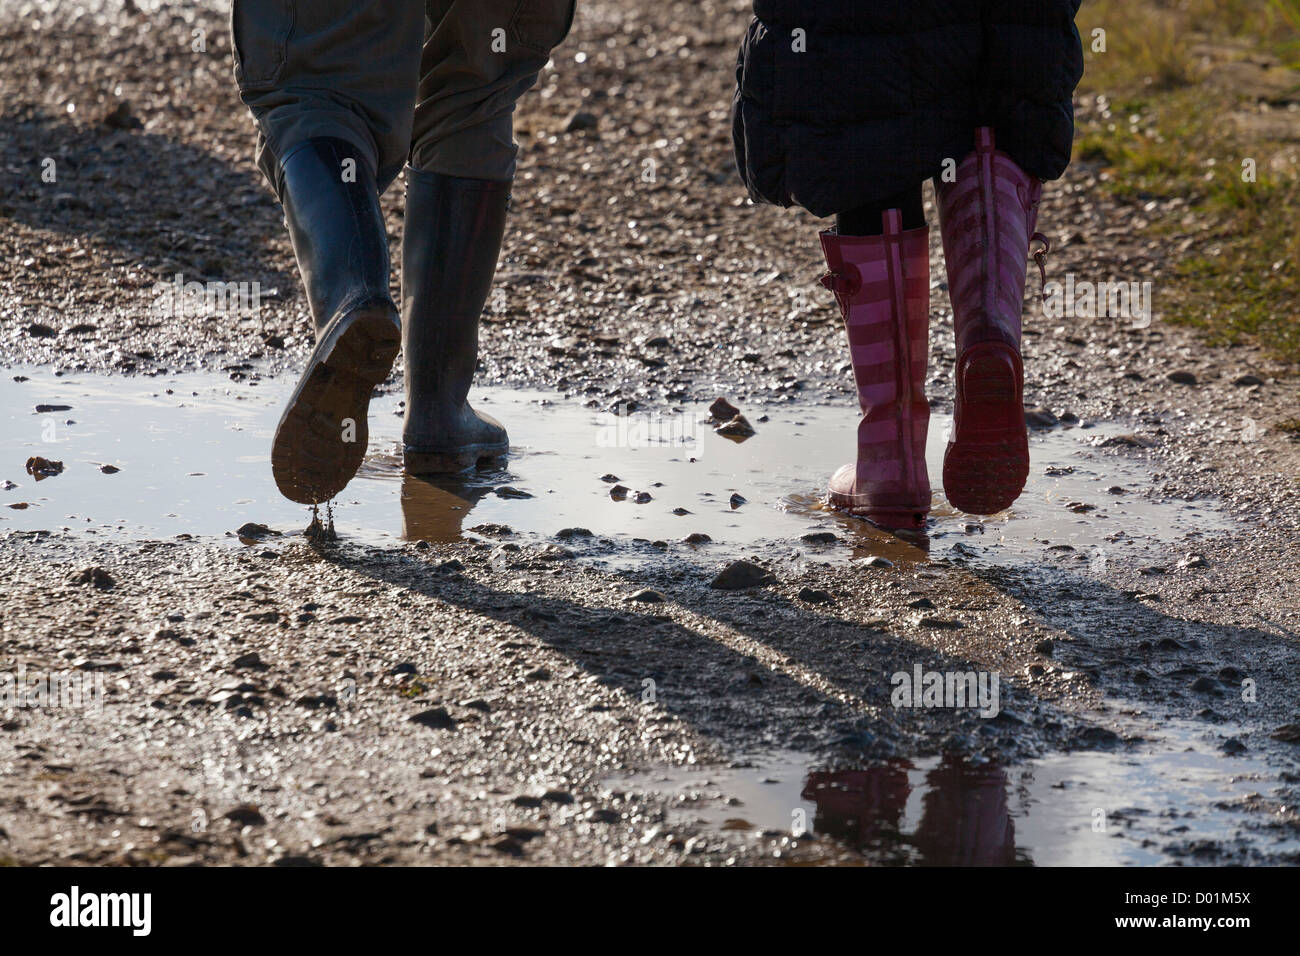 legs of two people in wellington boots  walking through puddles on a footpath Stock Photo